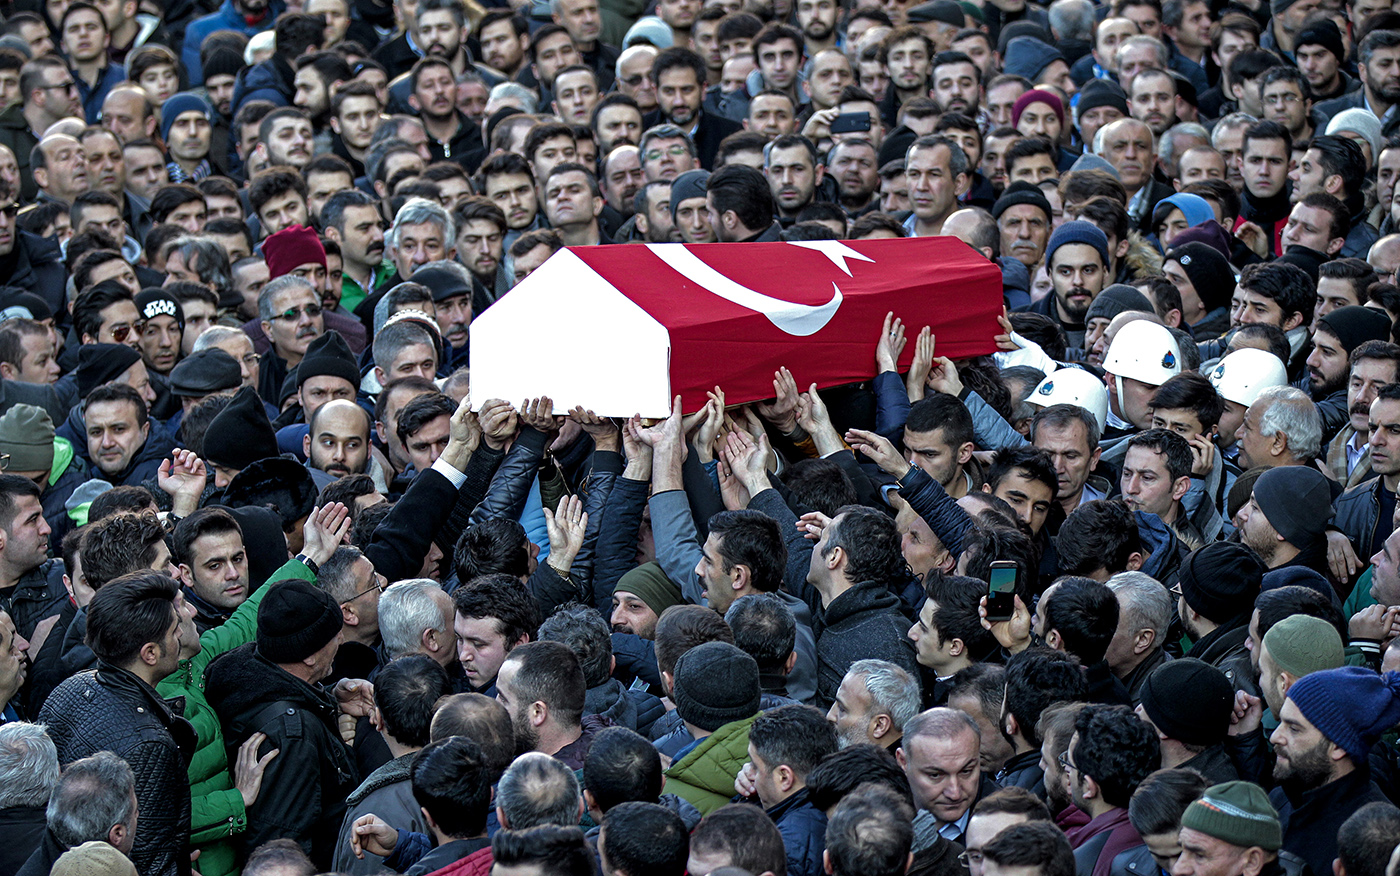 People and relatives of slain Yunus Gormek who was killed in the gun attack on the Reina night club in Istanbul on 01 January, carry his his coffin during a funeral in Istanbul, Turkey 02 January 2017.